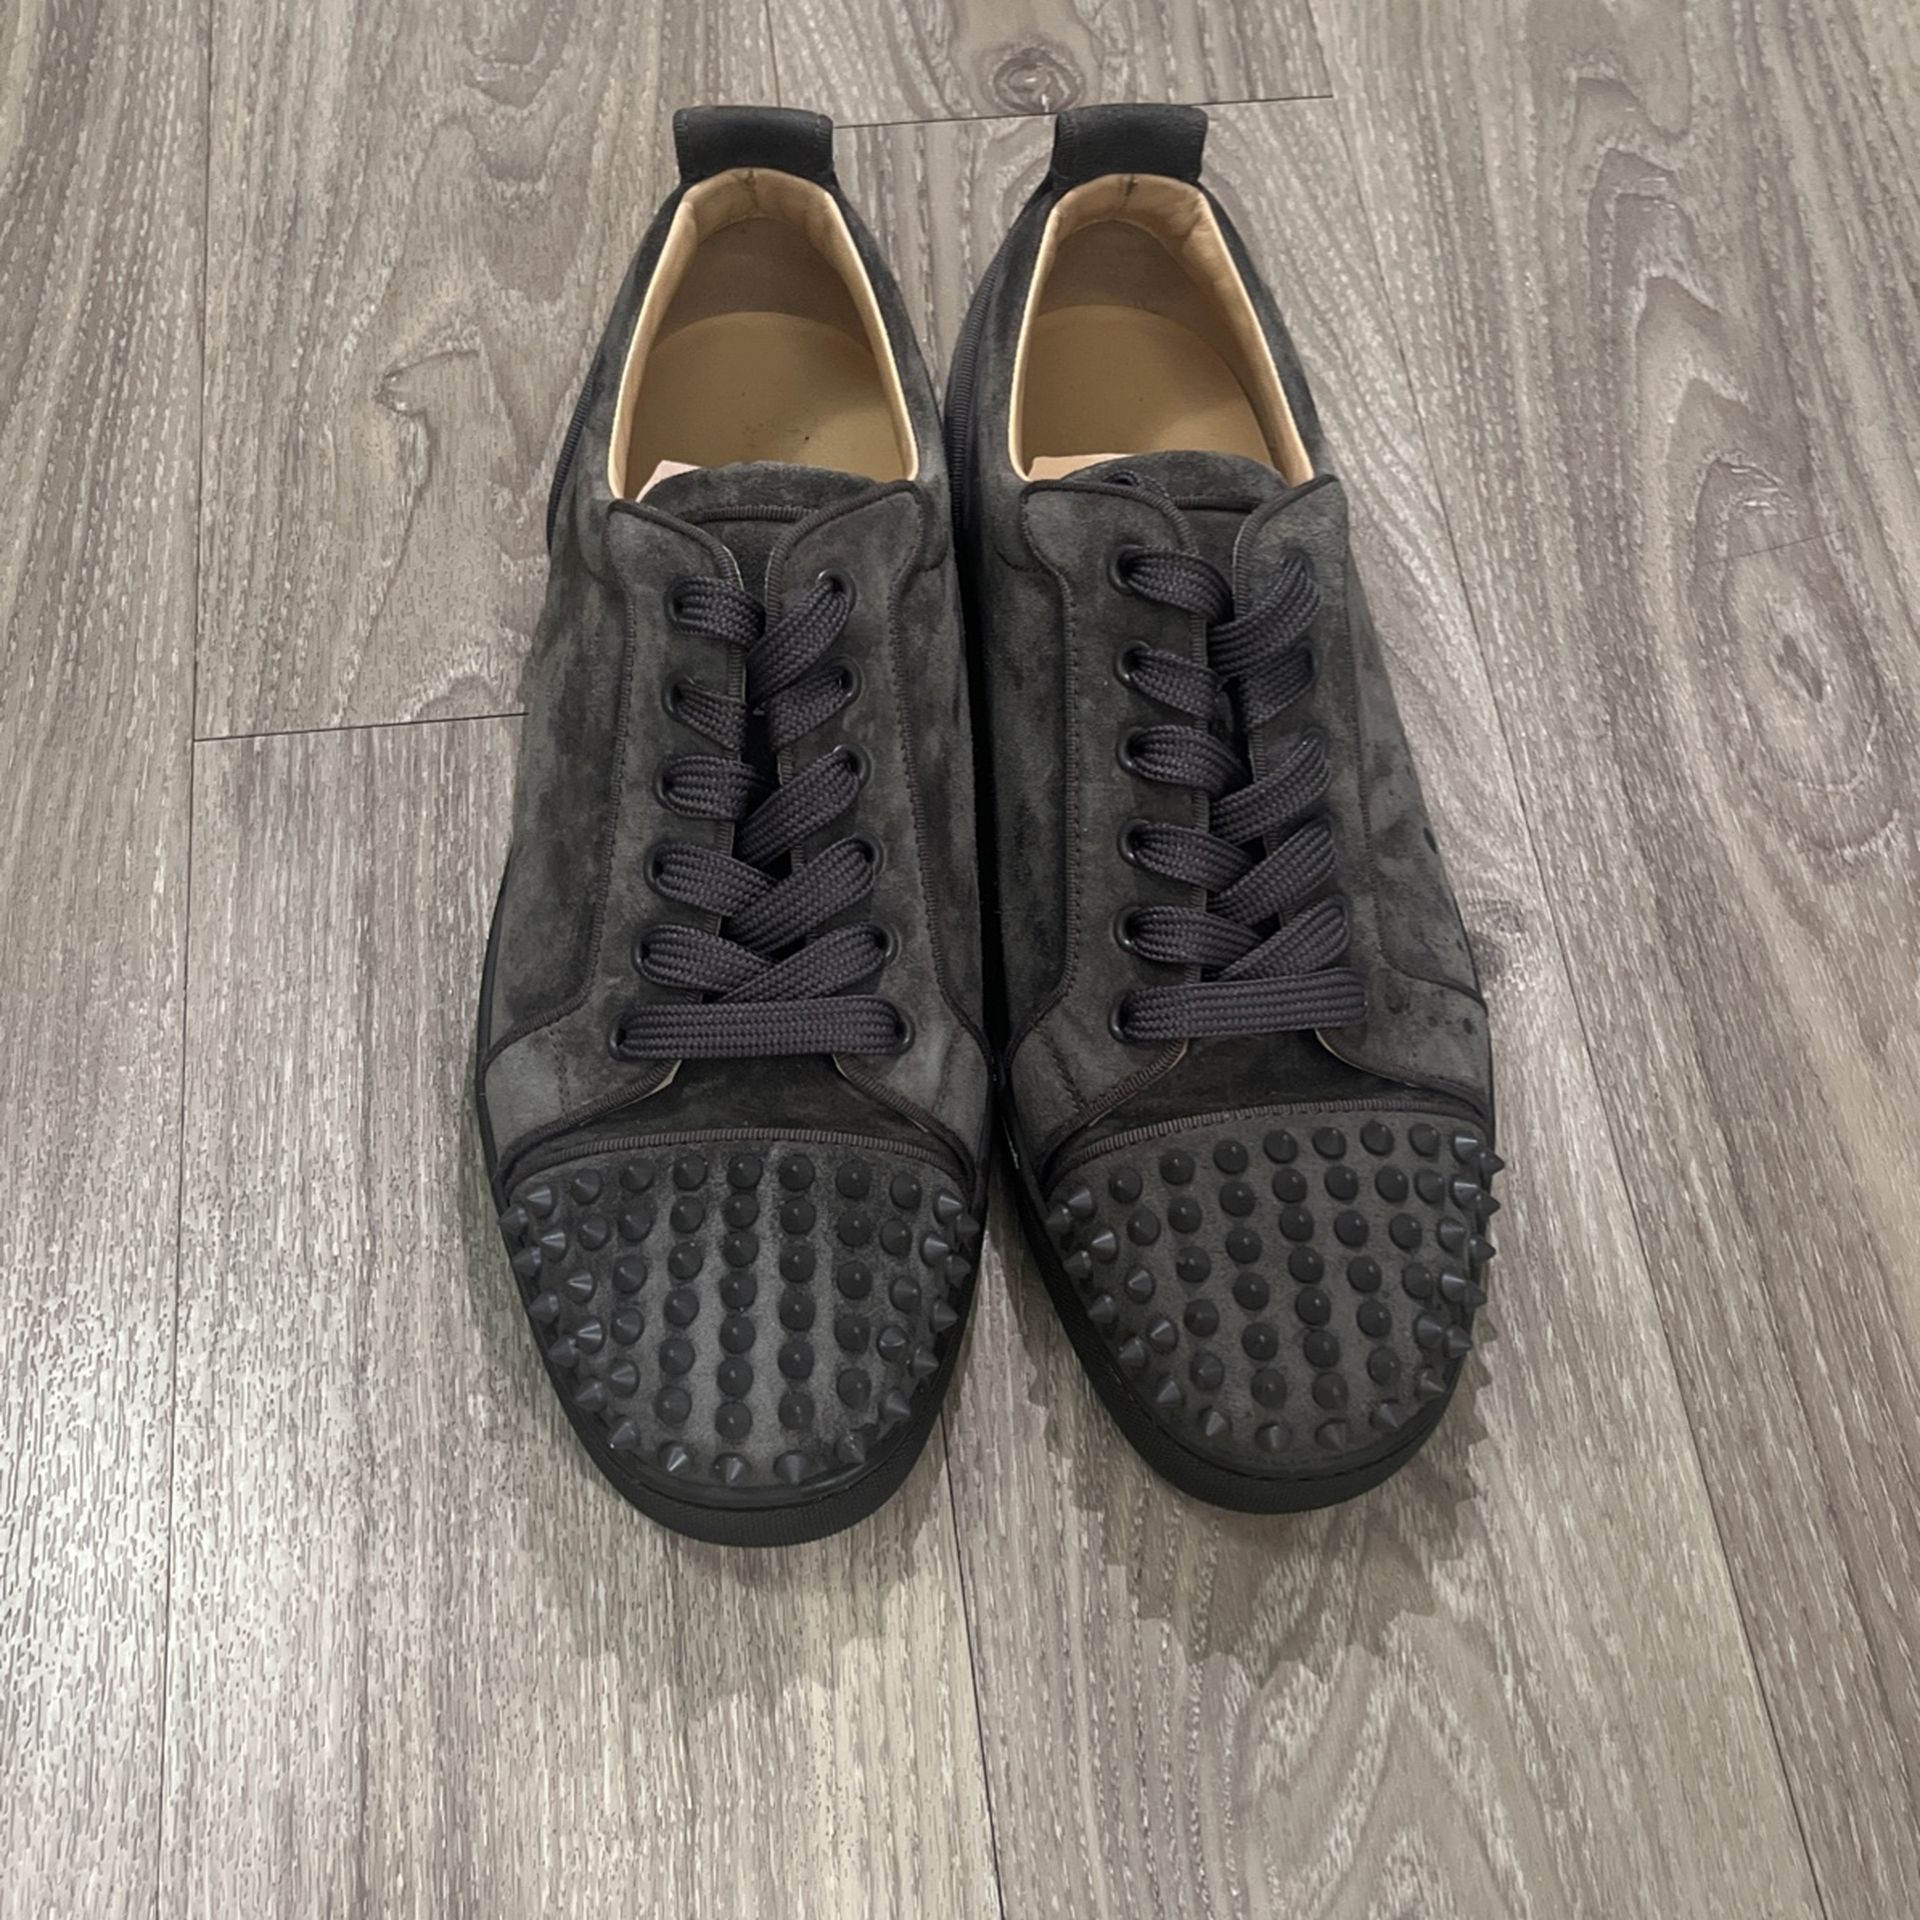 Christian Louis Vuitton shoes for Sale in Manteca, CA - OfferUp